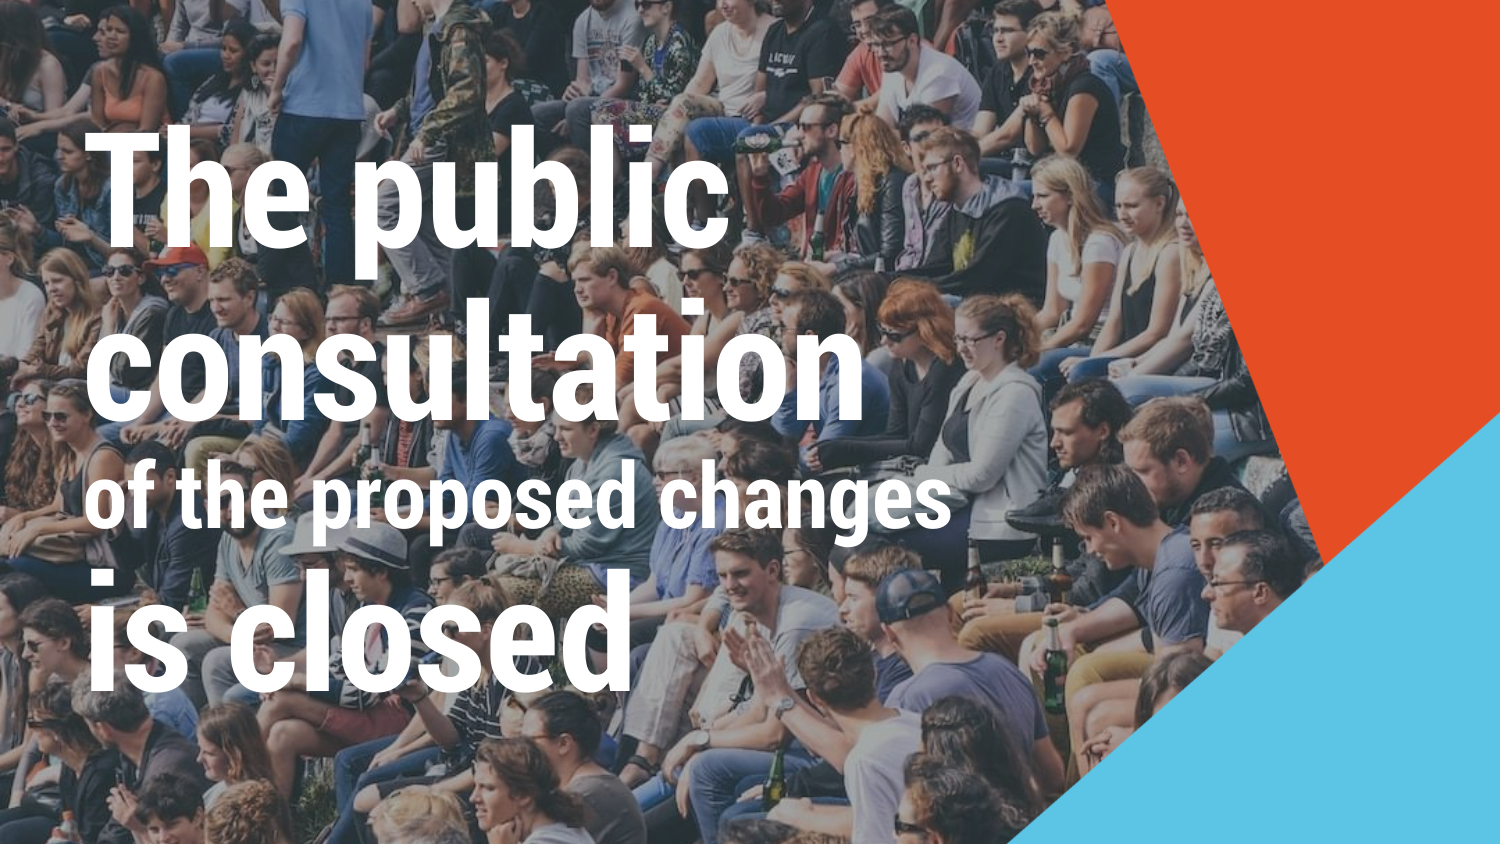 The public consultation of the proposed changes is closed